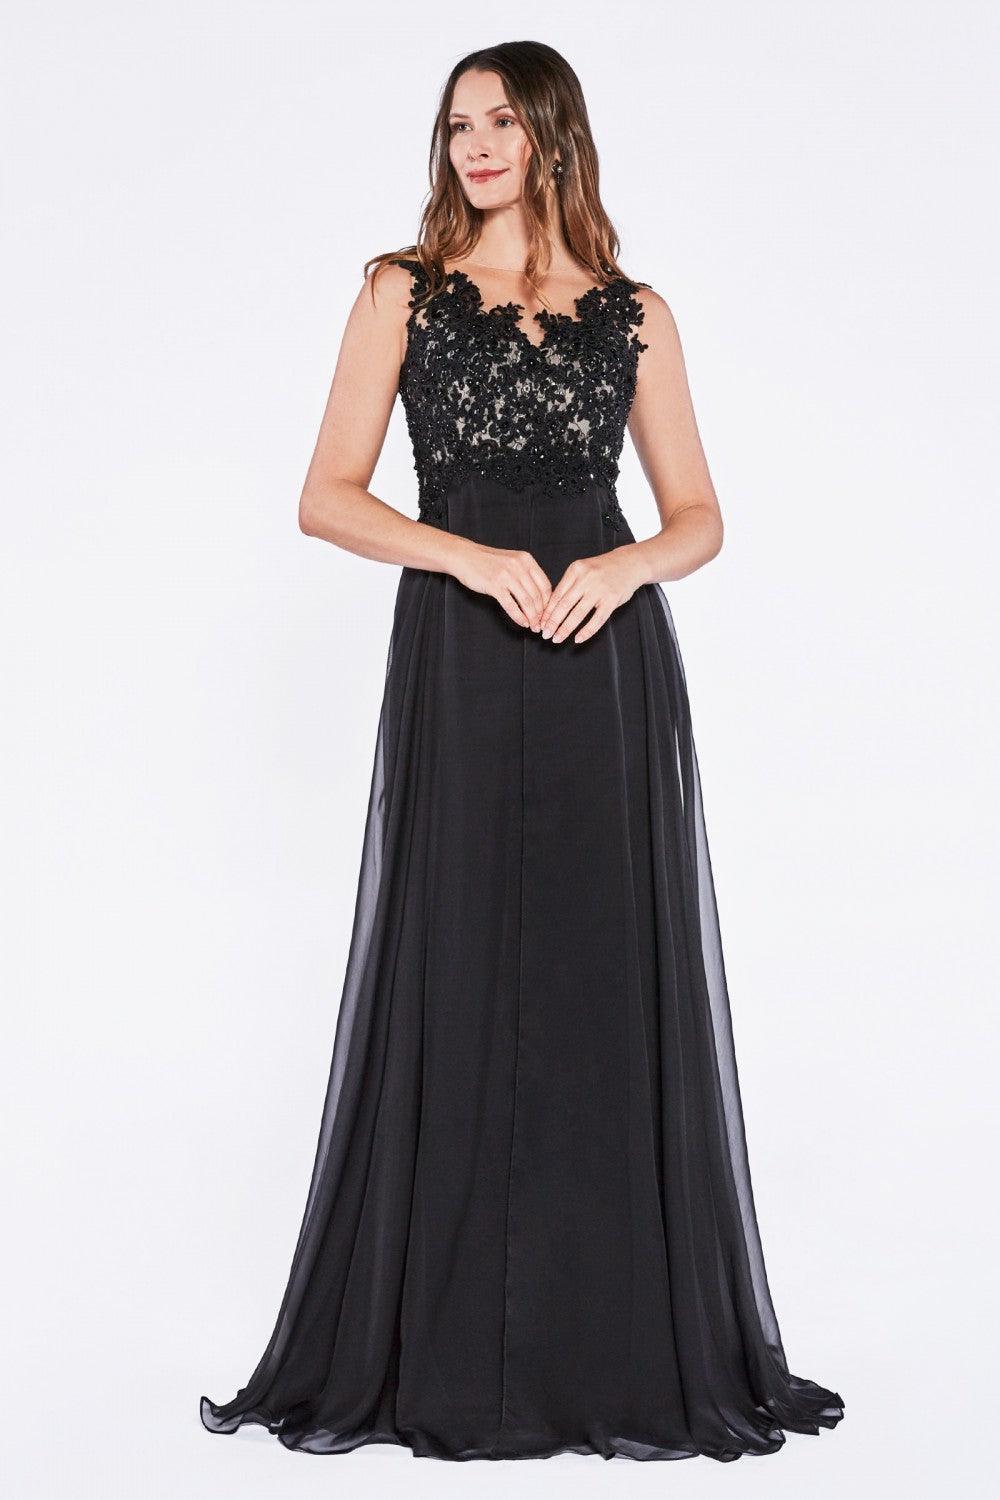 Long Sleeveless Formal Dress Prom Gown - The Dress Outlet Cinderella Divine